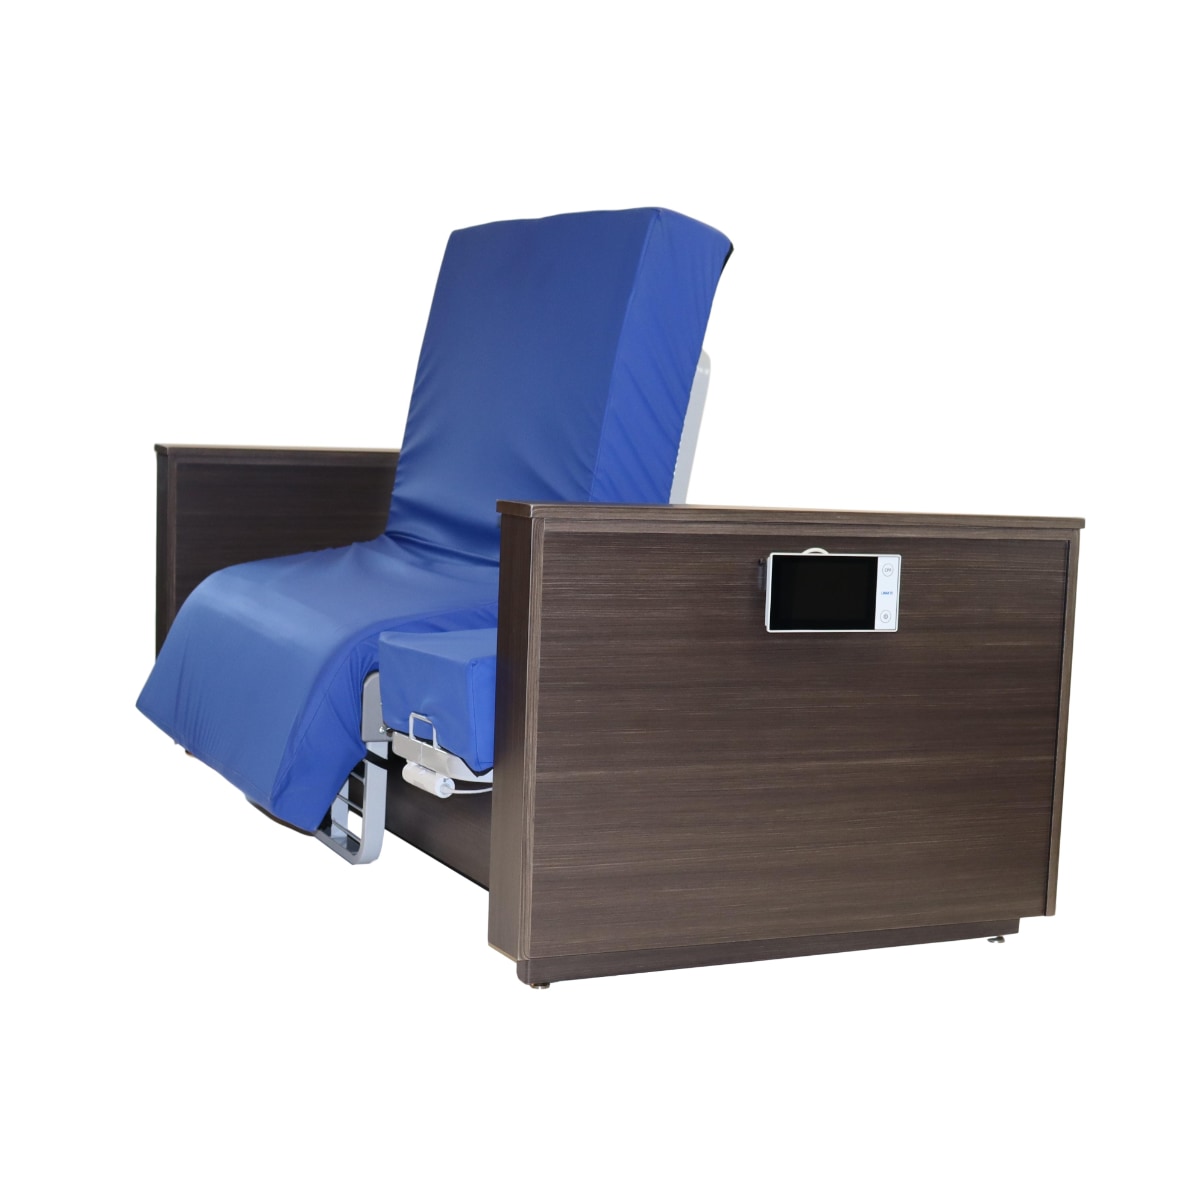 ActiveCare Auto Pivot hospital bed in upright position